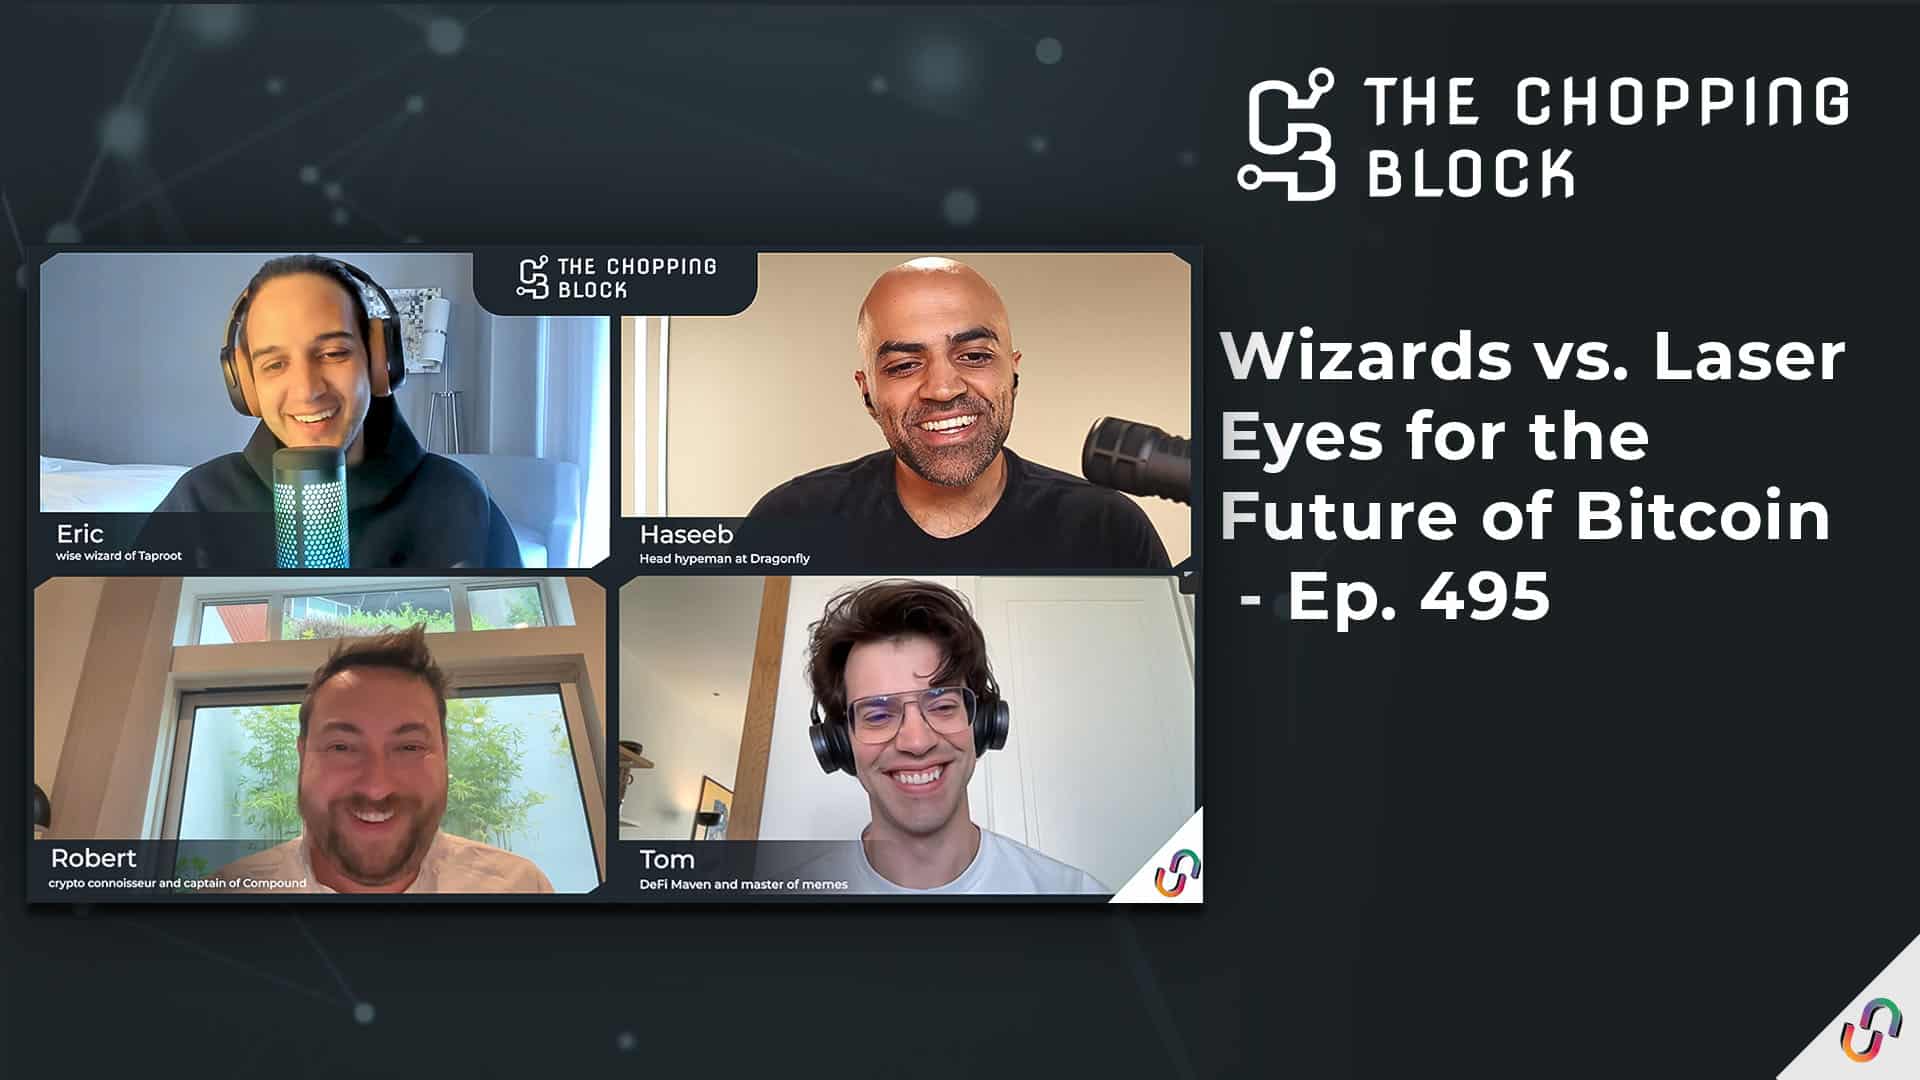 The Chopping Block: Wizards vs. Laser Eyes for the Future of Bitcoin - Ep. 495